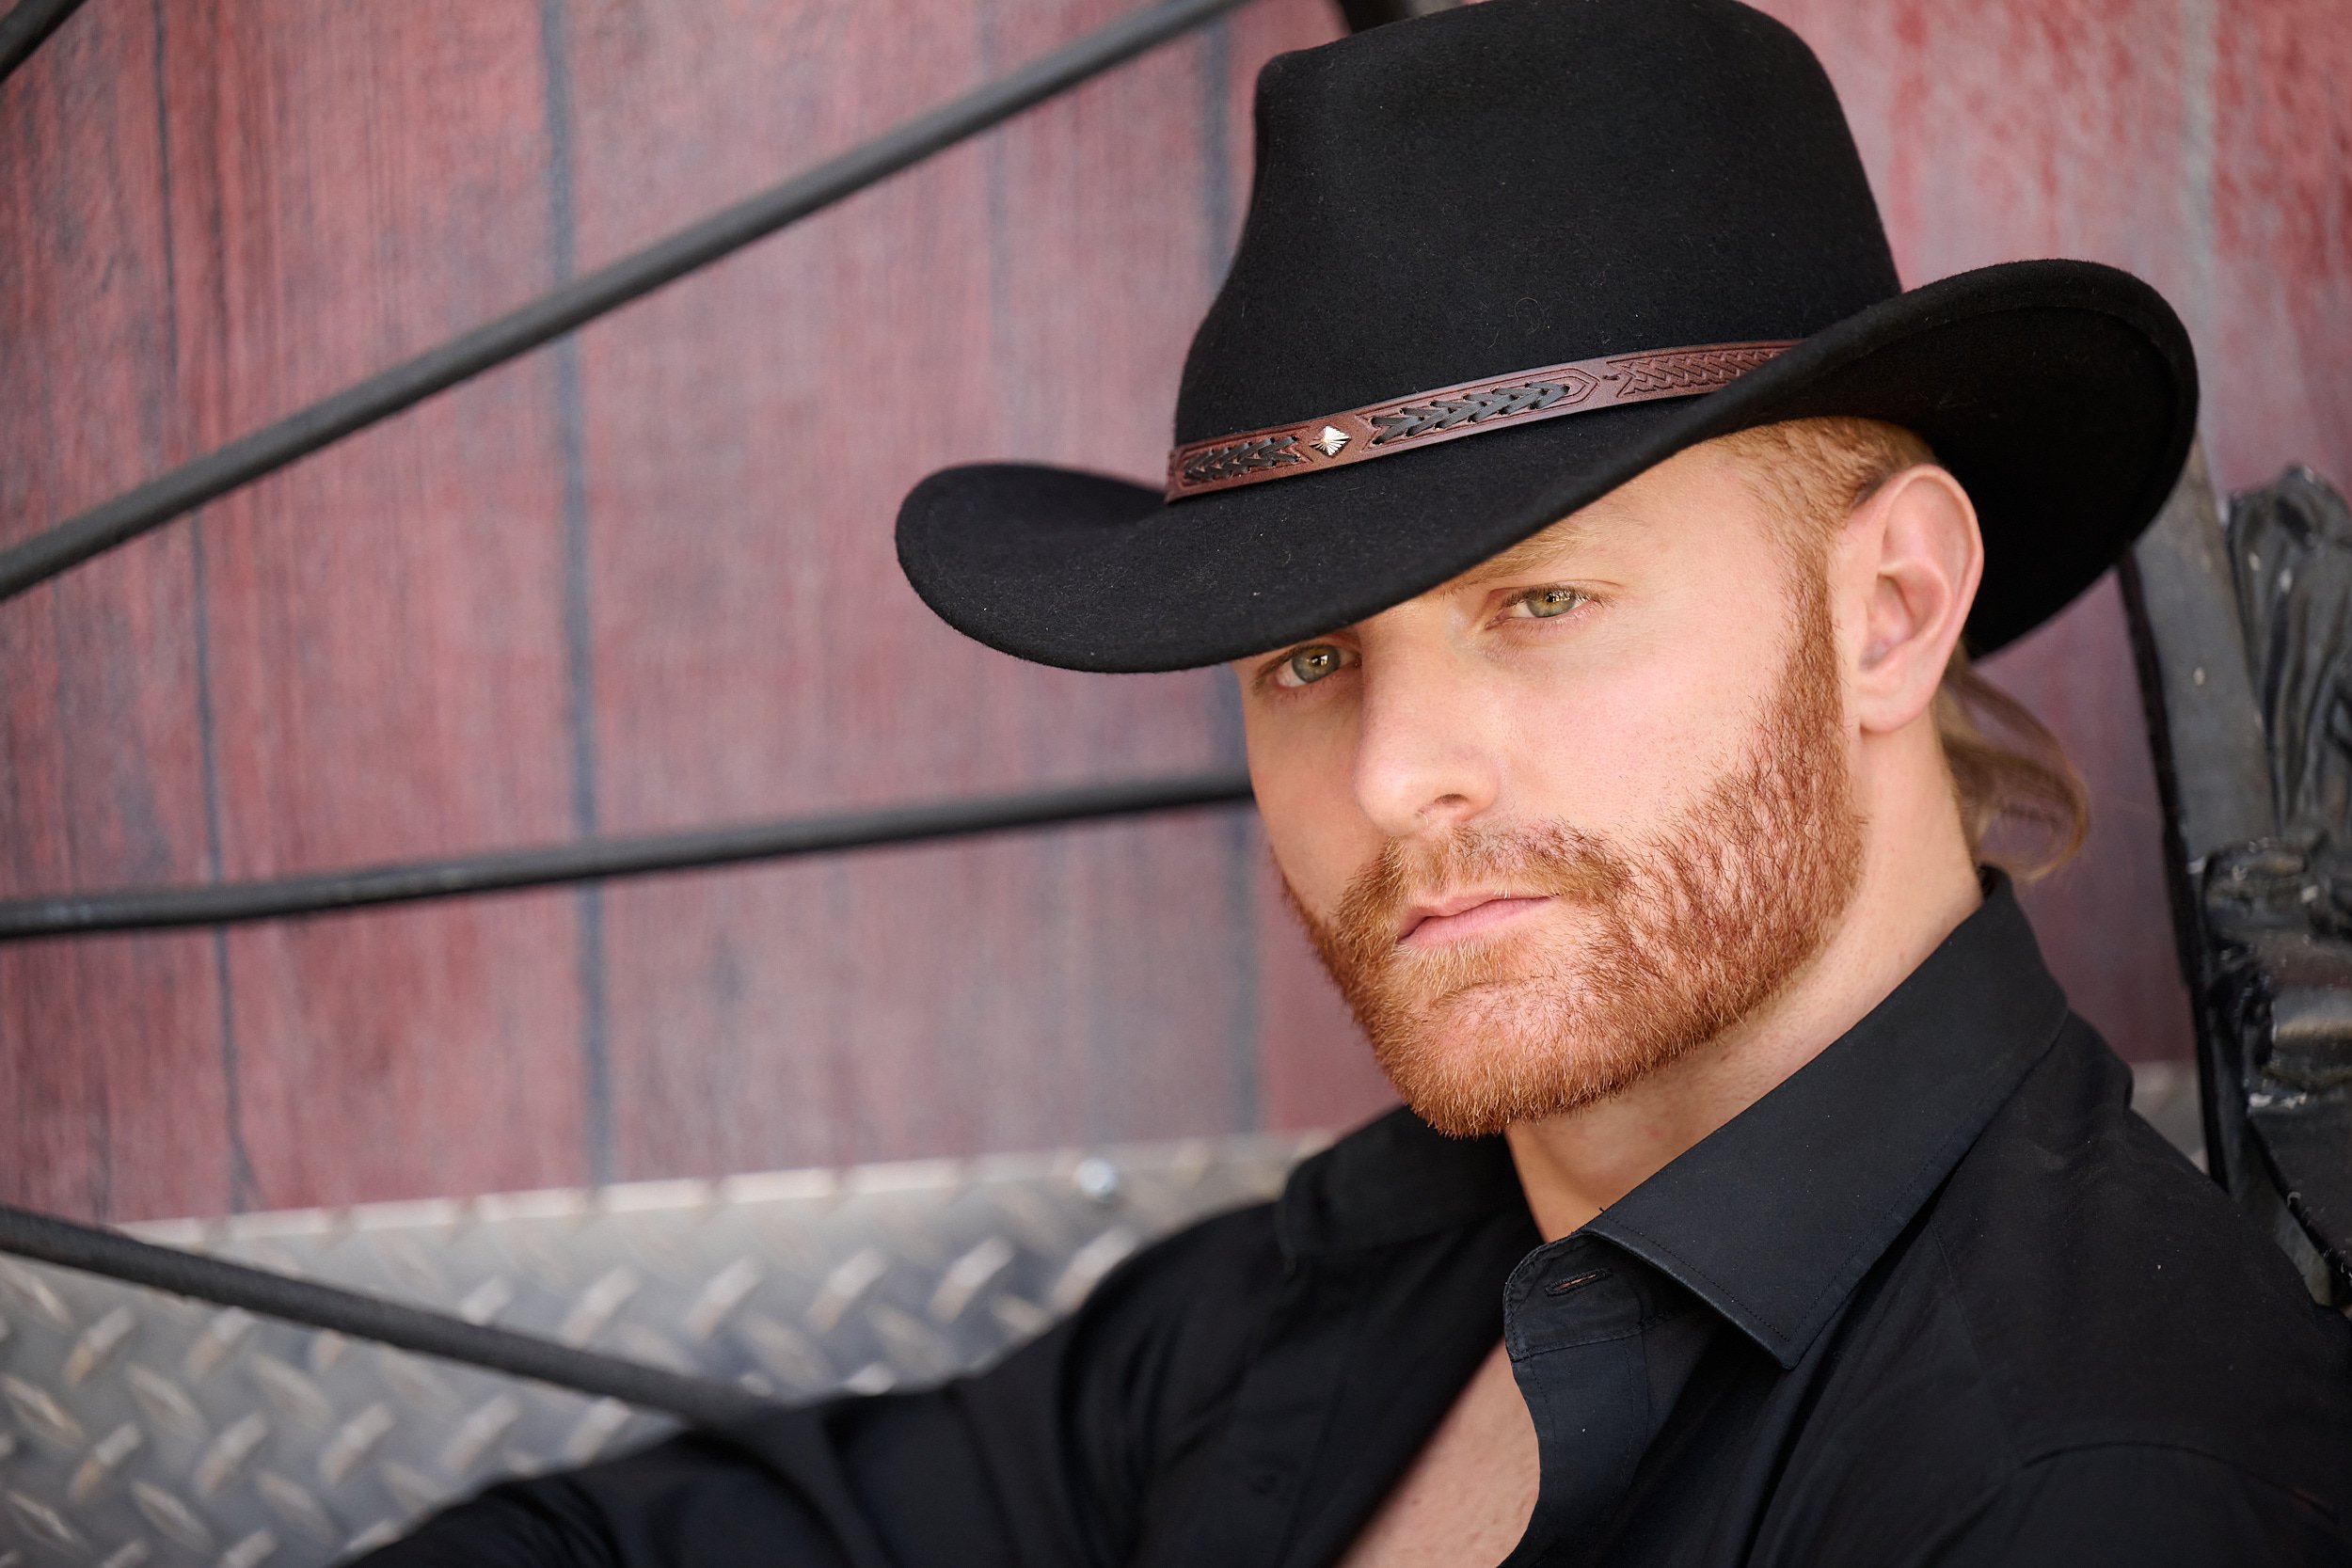  THE WOODLANDS, TEXAS - MAY 2022: Wyatt Hopkins is posing for sophisticated cowboy portraits by a barn on a  horse ranch. The man has short red hair, mustache and beard. He wears a black fedora hat. 